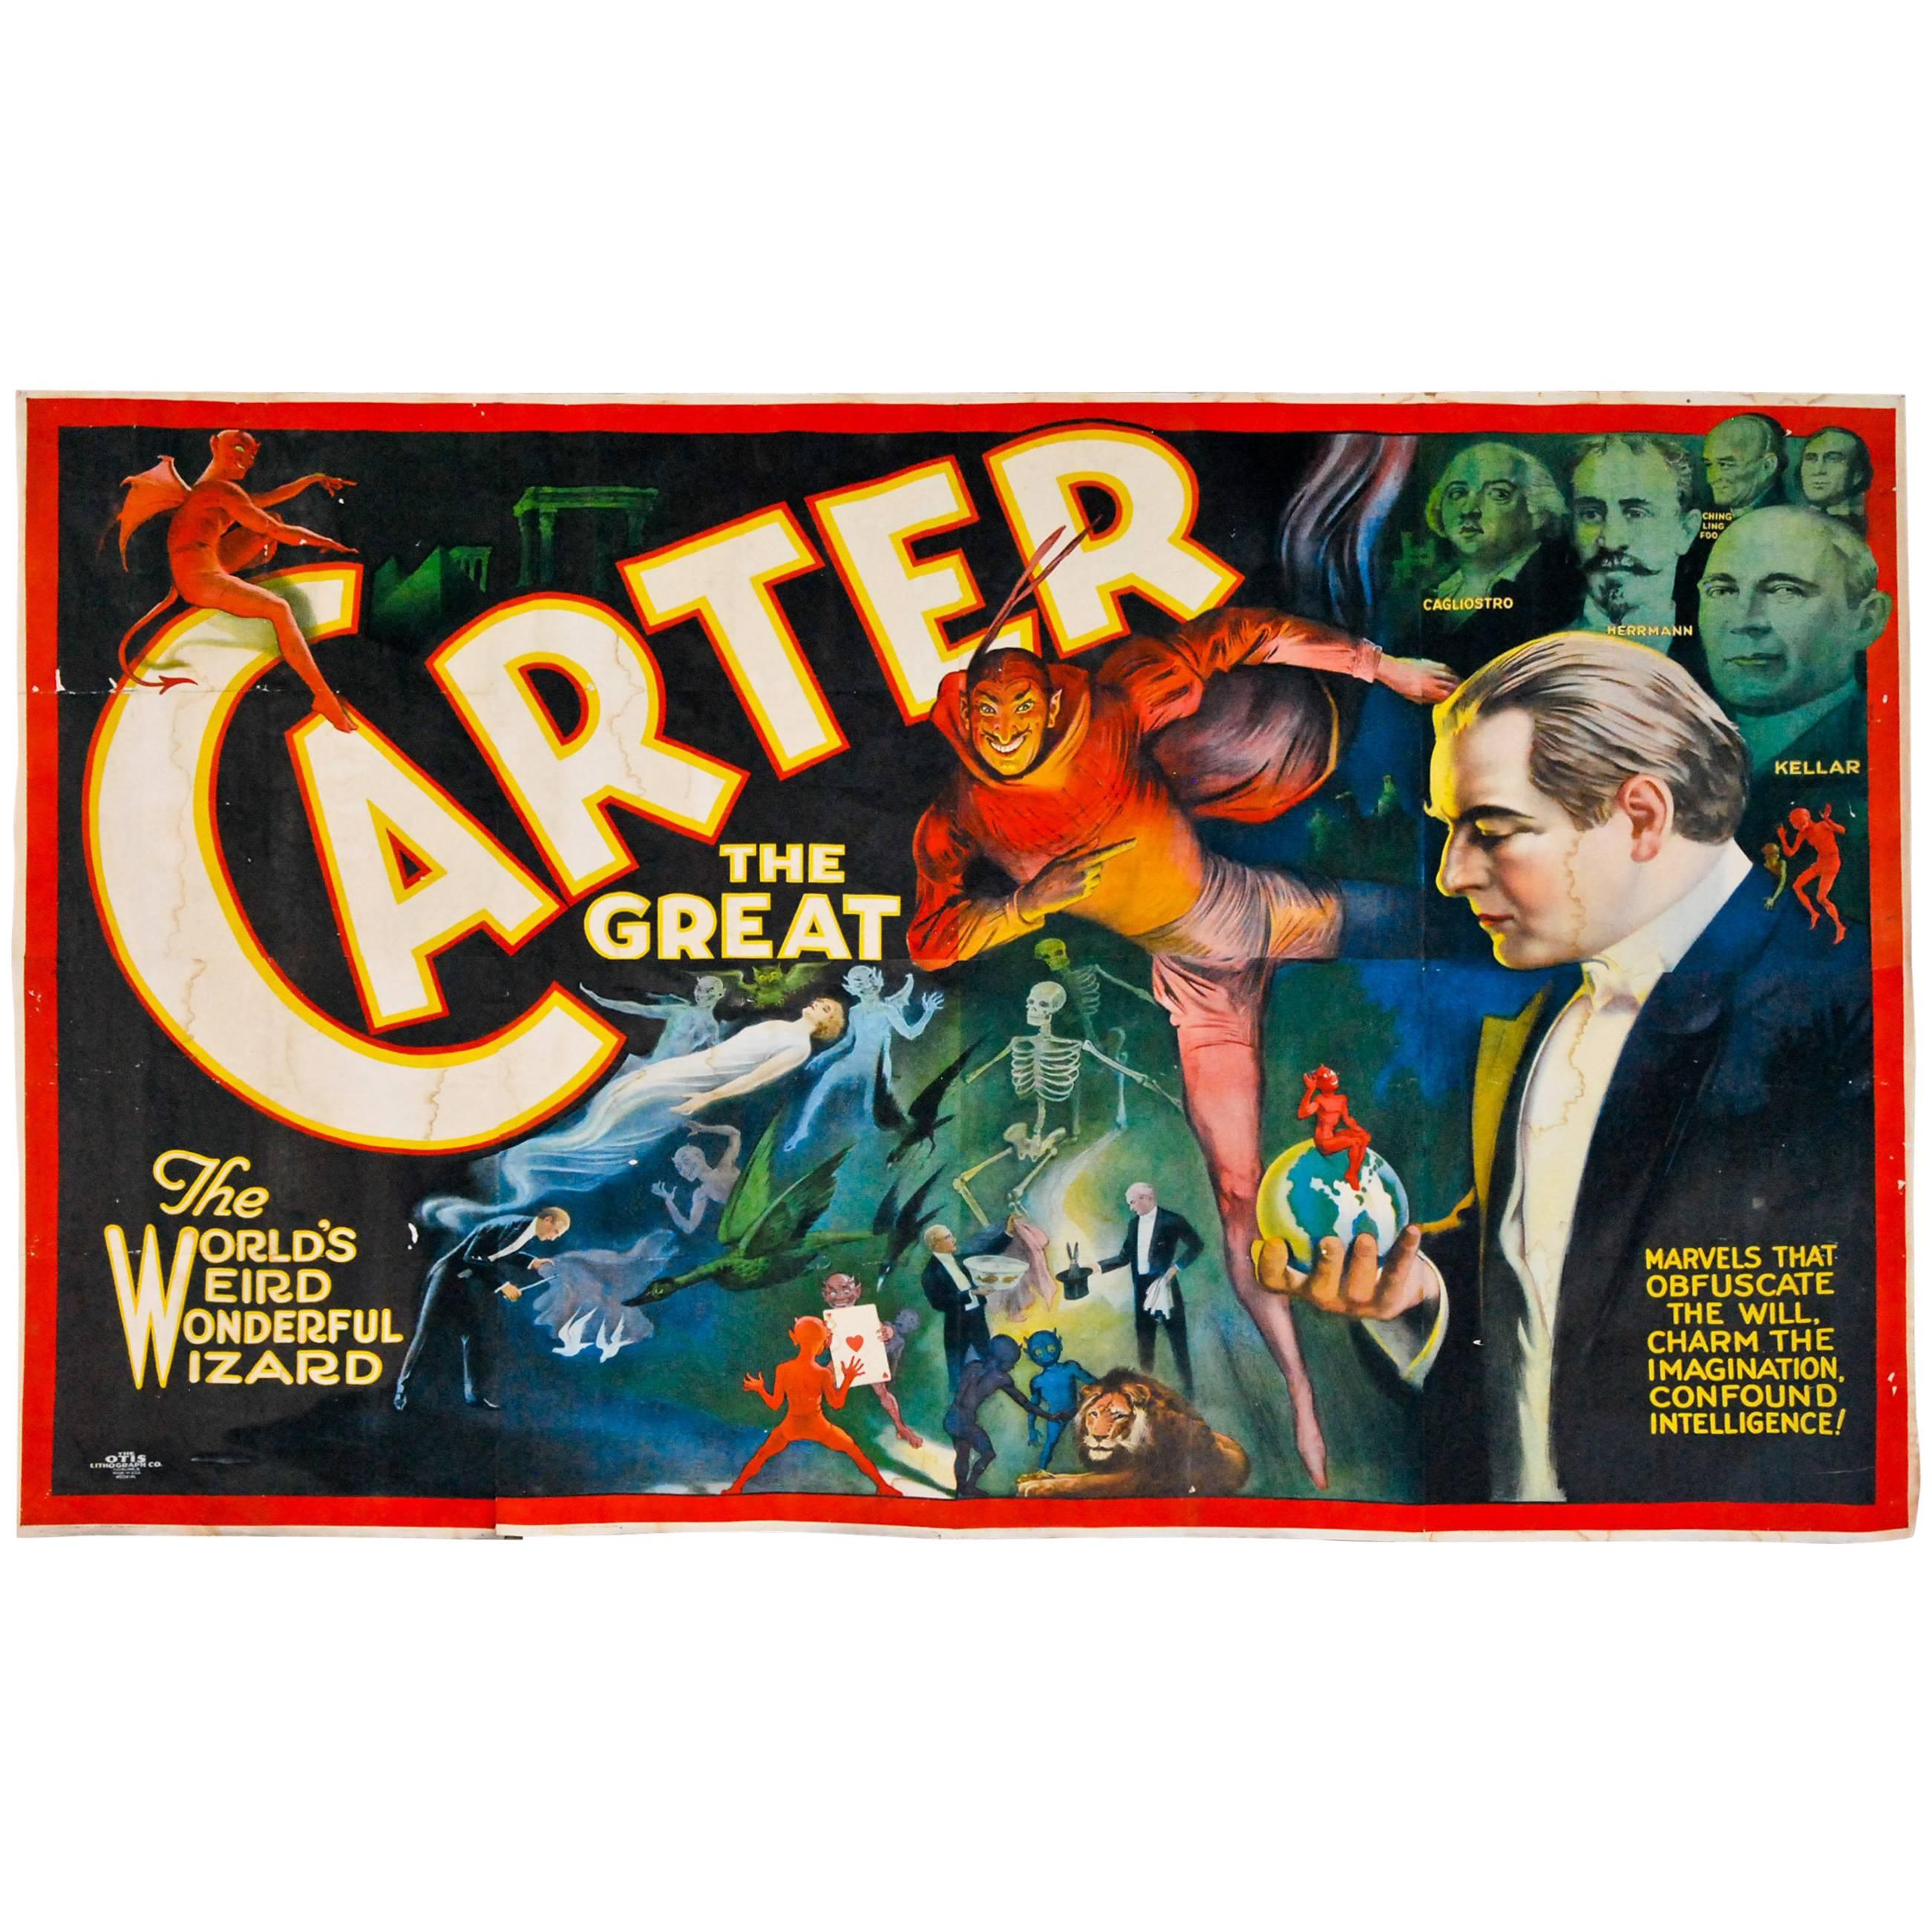 1915 ‘Carter the Great’ Banner by Otis Lithograph, Cleveland For Sale